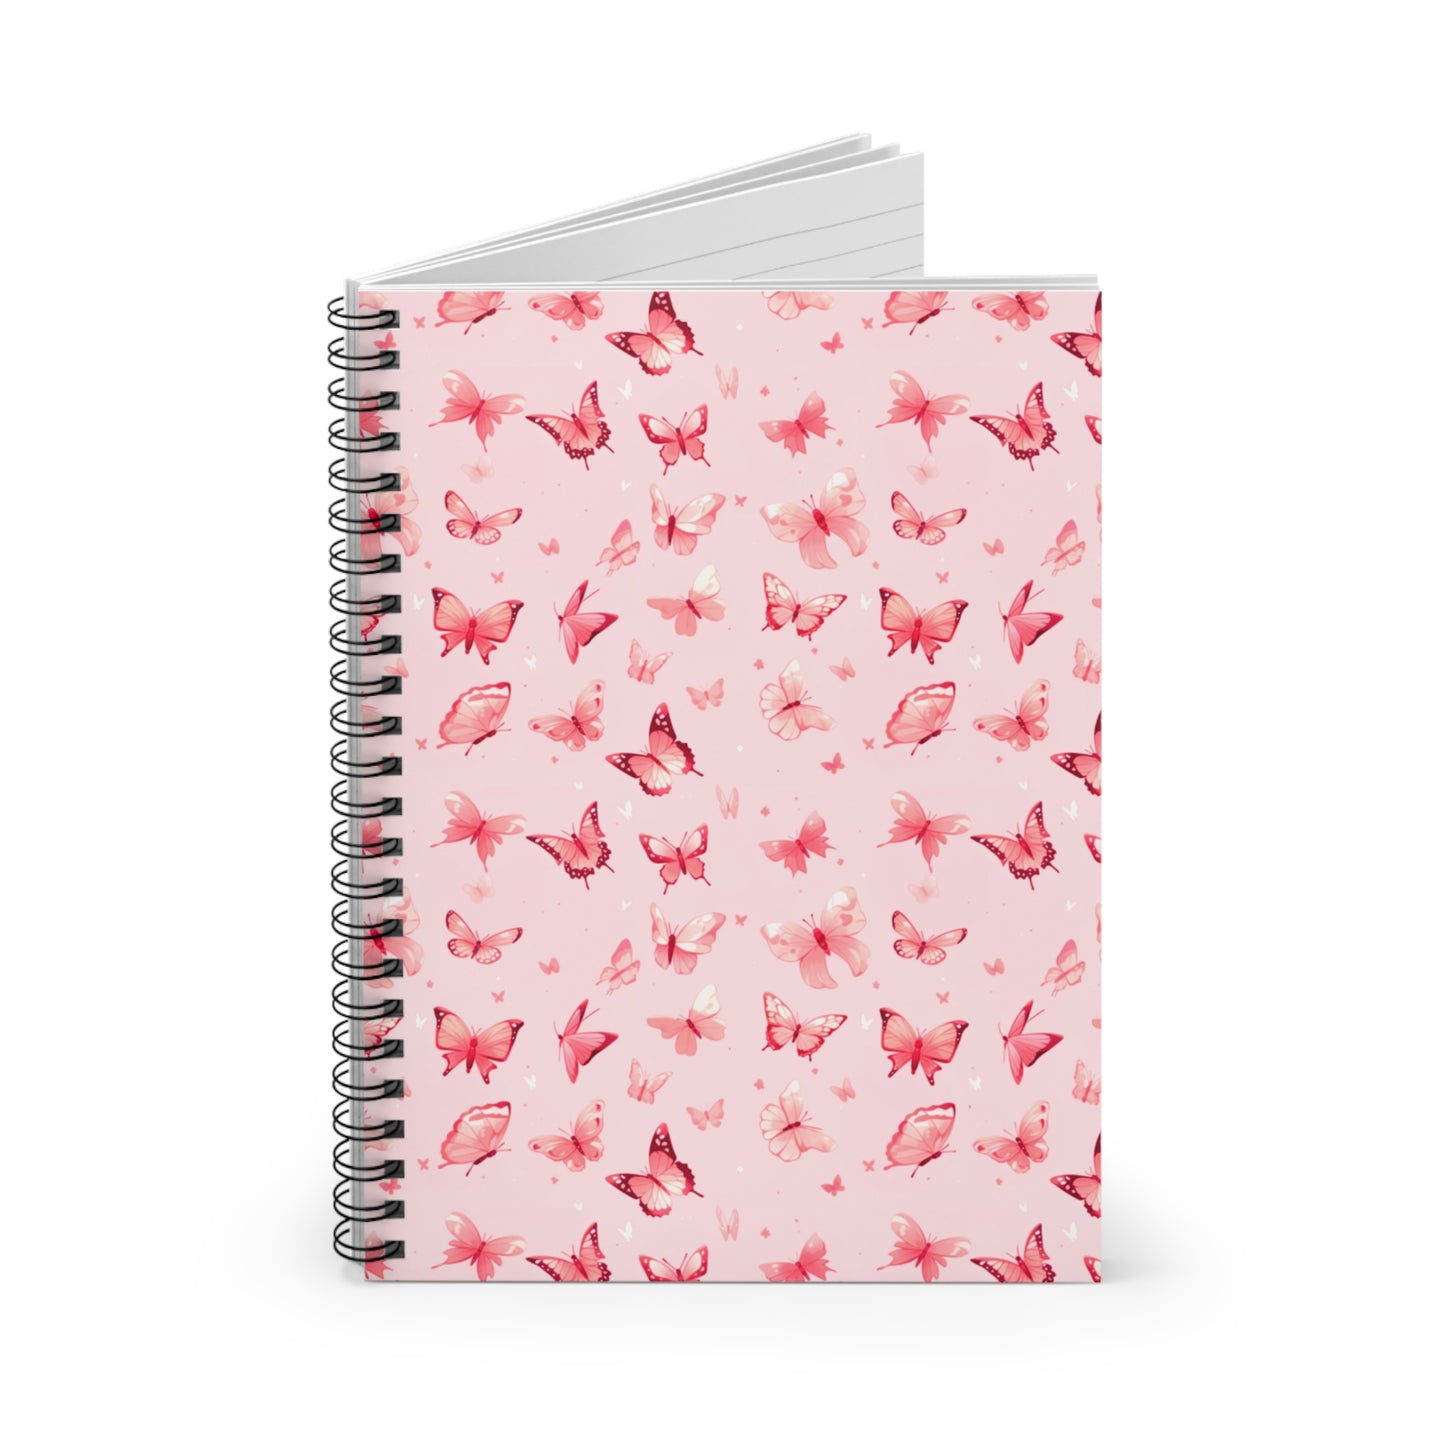 Whimsical Pink Butterflies | Ruled Line Spiral Notebook